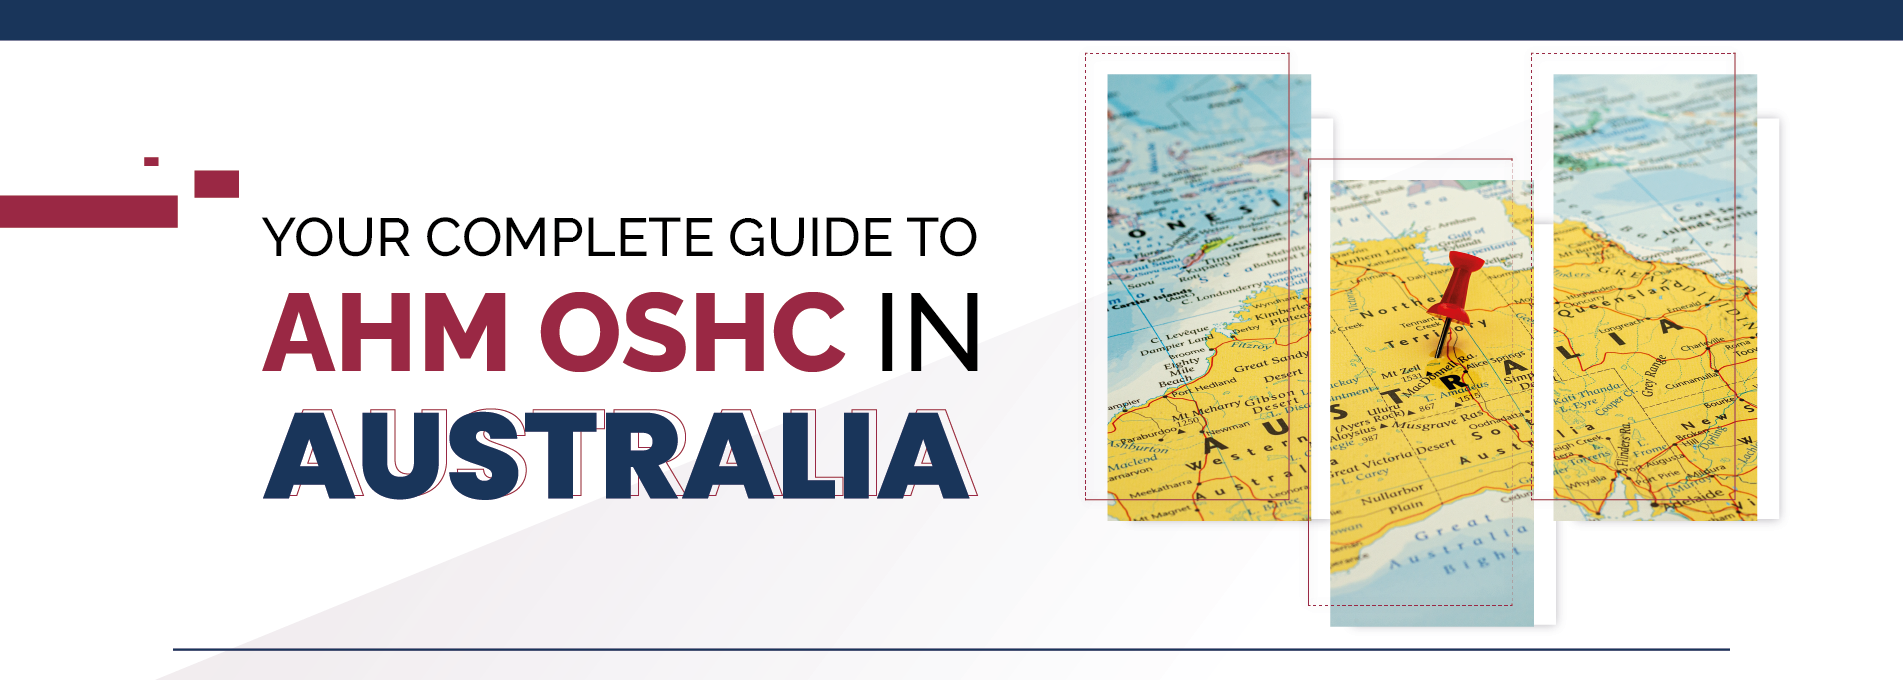 Your Complete Guide to AHM OSHC in Australia